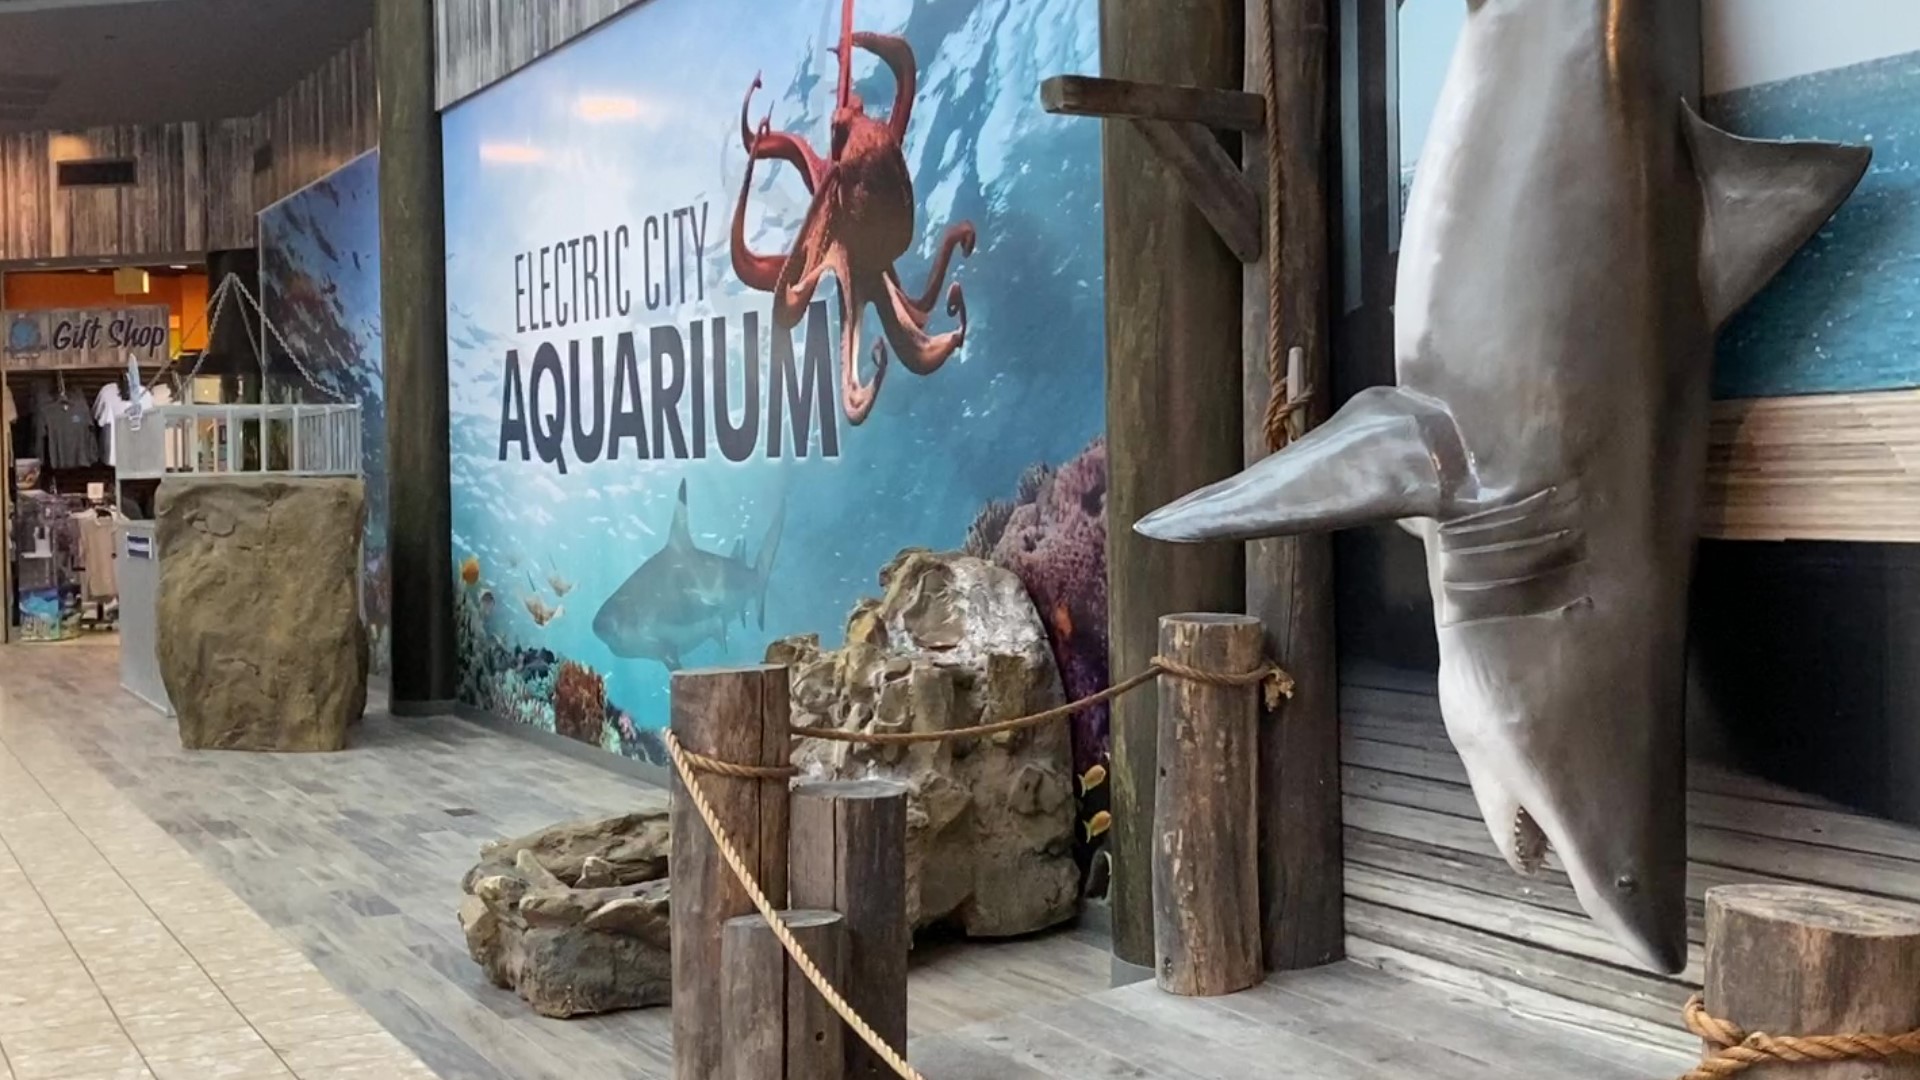 The Electric City Aquarium and Reptile Den, inside the Marketplace at Steamtown, is giving folks an escape from the cold with its annual Wine Under the Waves.